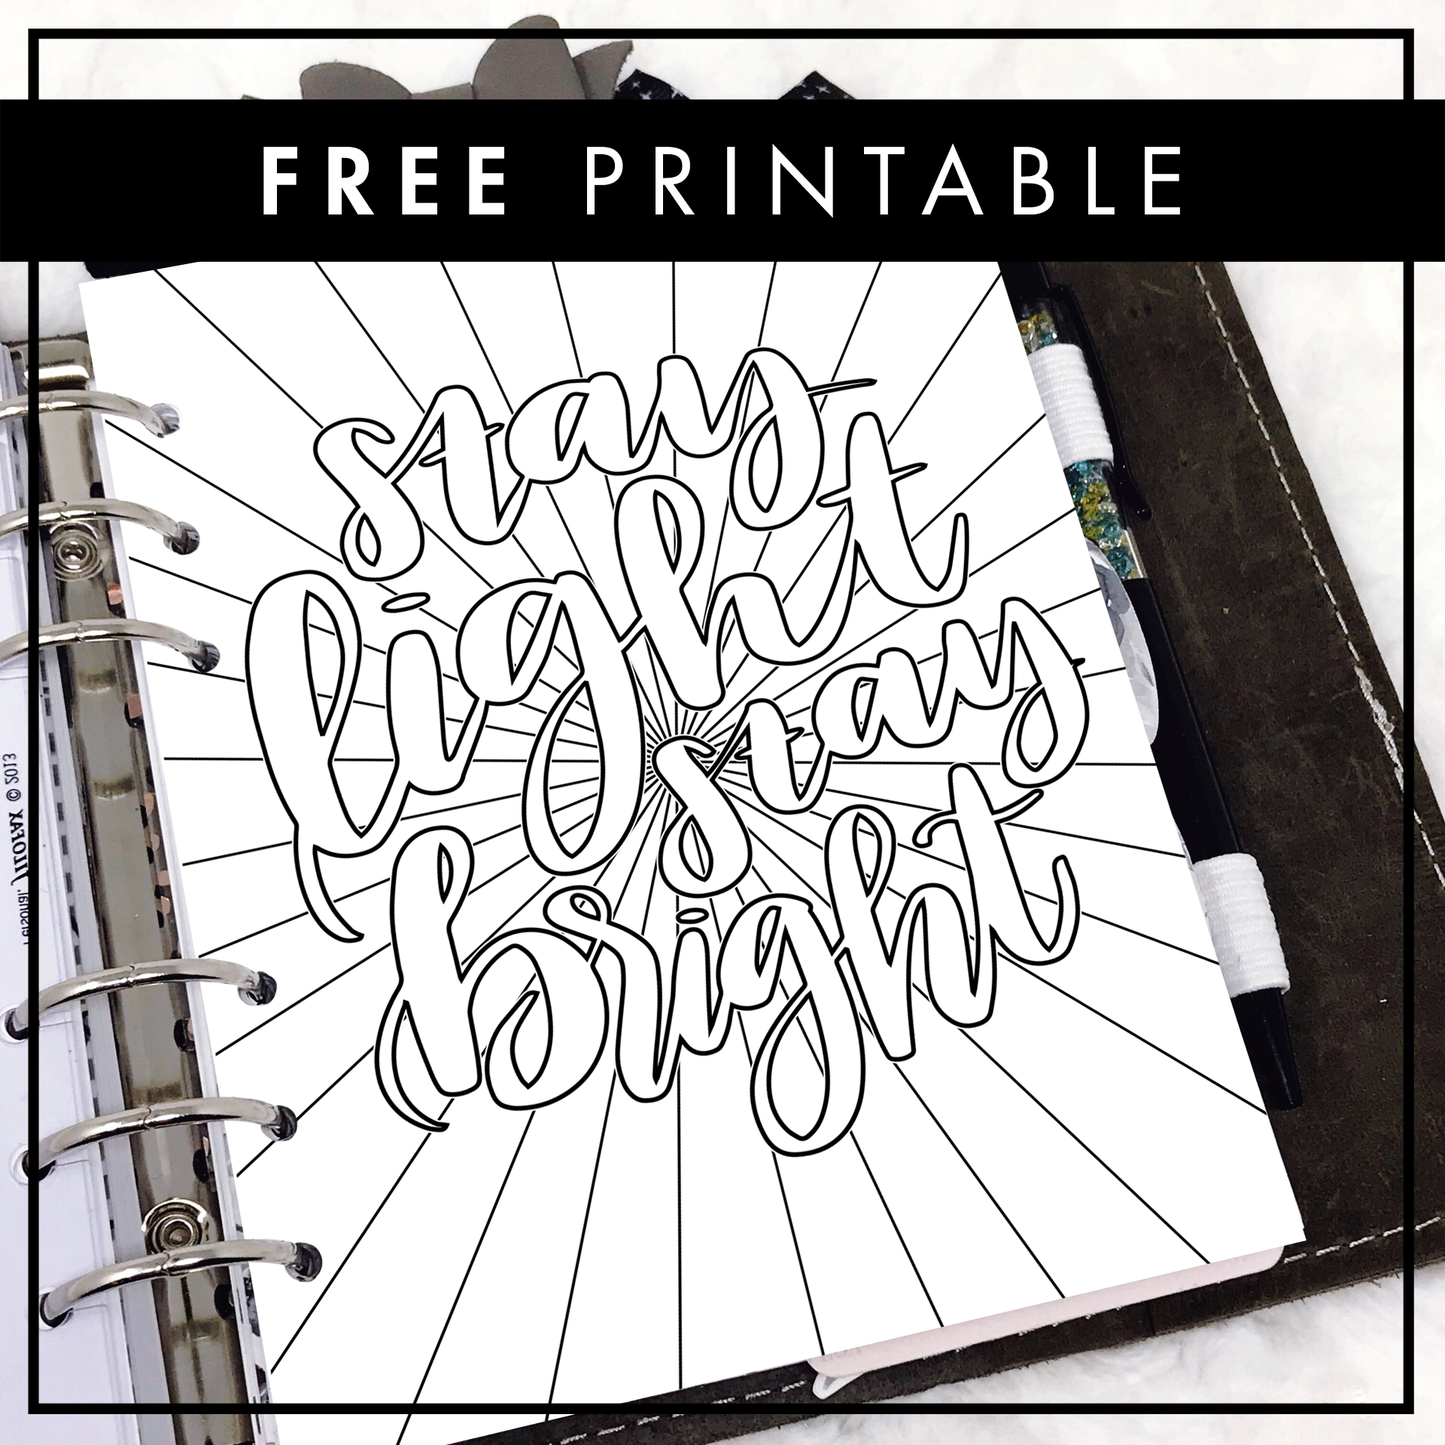 Stay Light Stay Bright | Coloring Sheet | FREE Printable